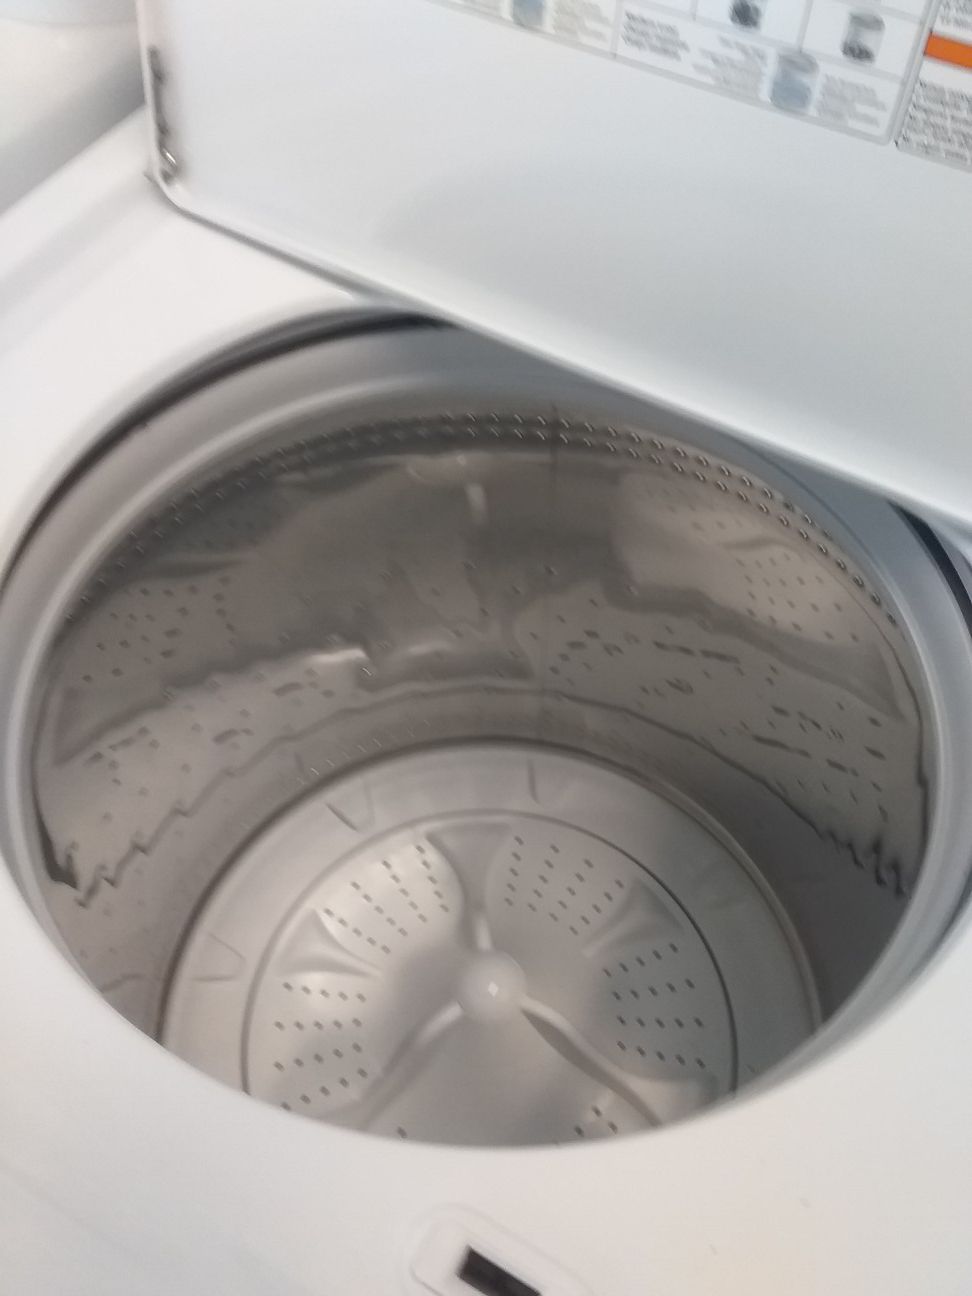 Whirlpool washer and gas dryer new scratch and dents good condition 6 months warranty